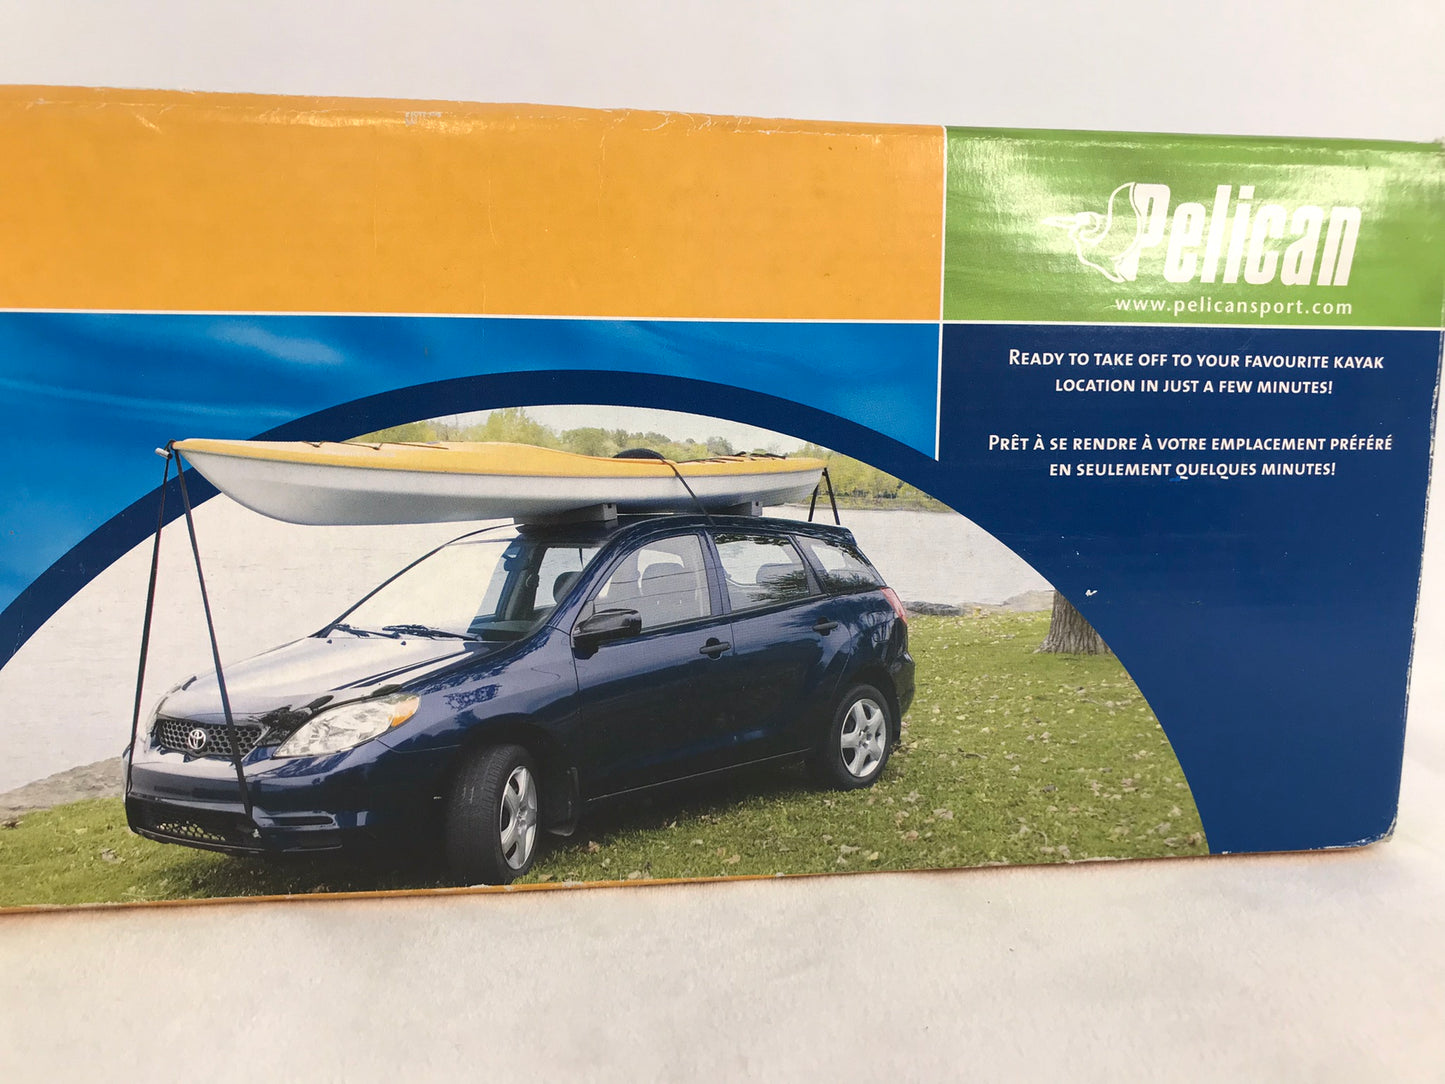 Kayak Carrier Kit Pelican Car Carrier New In Box Never Used